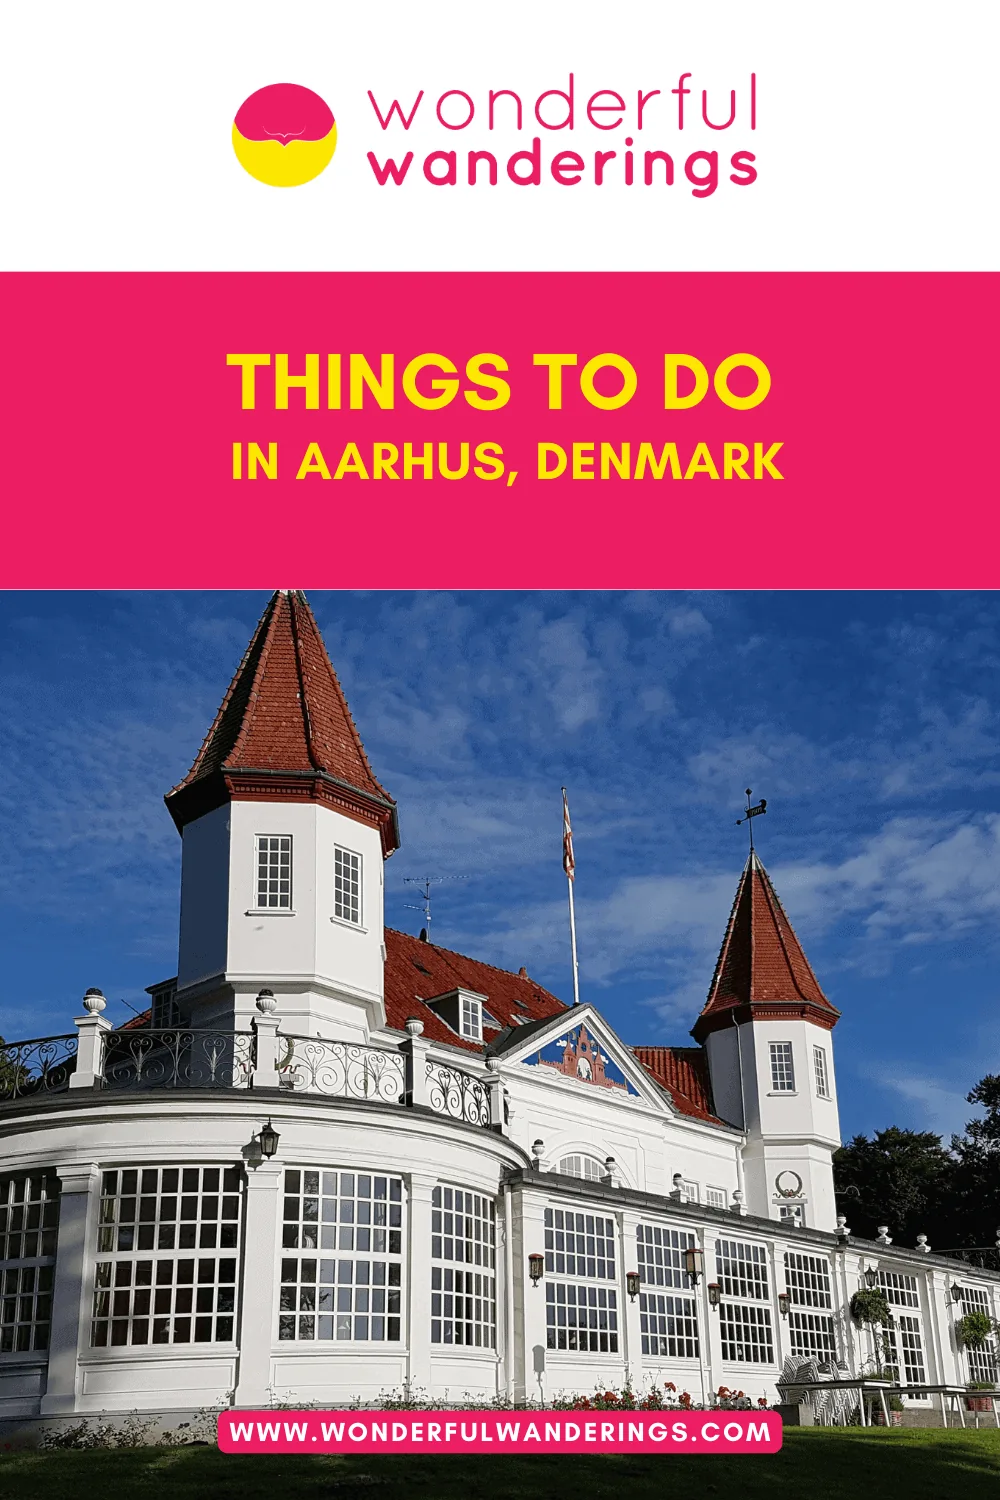 17 Remarkable Things to do in Aarhus: Museums, History and Travel Guide